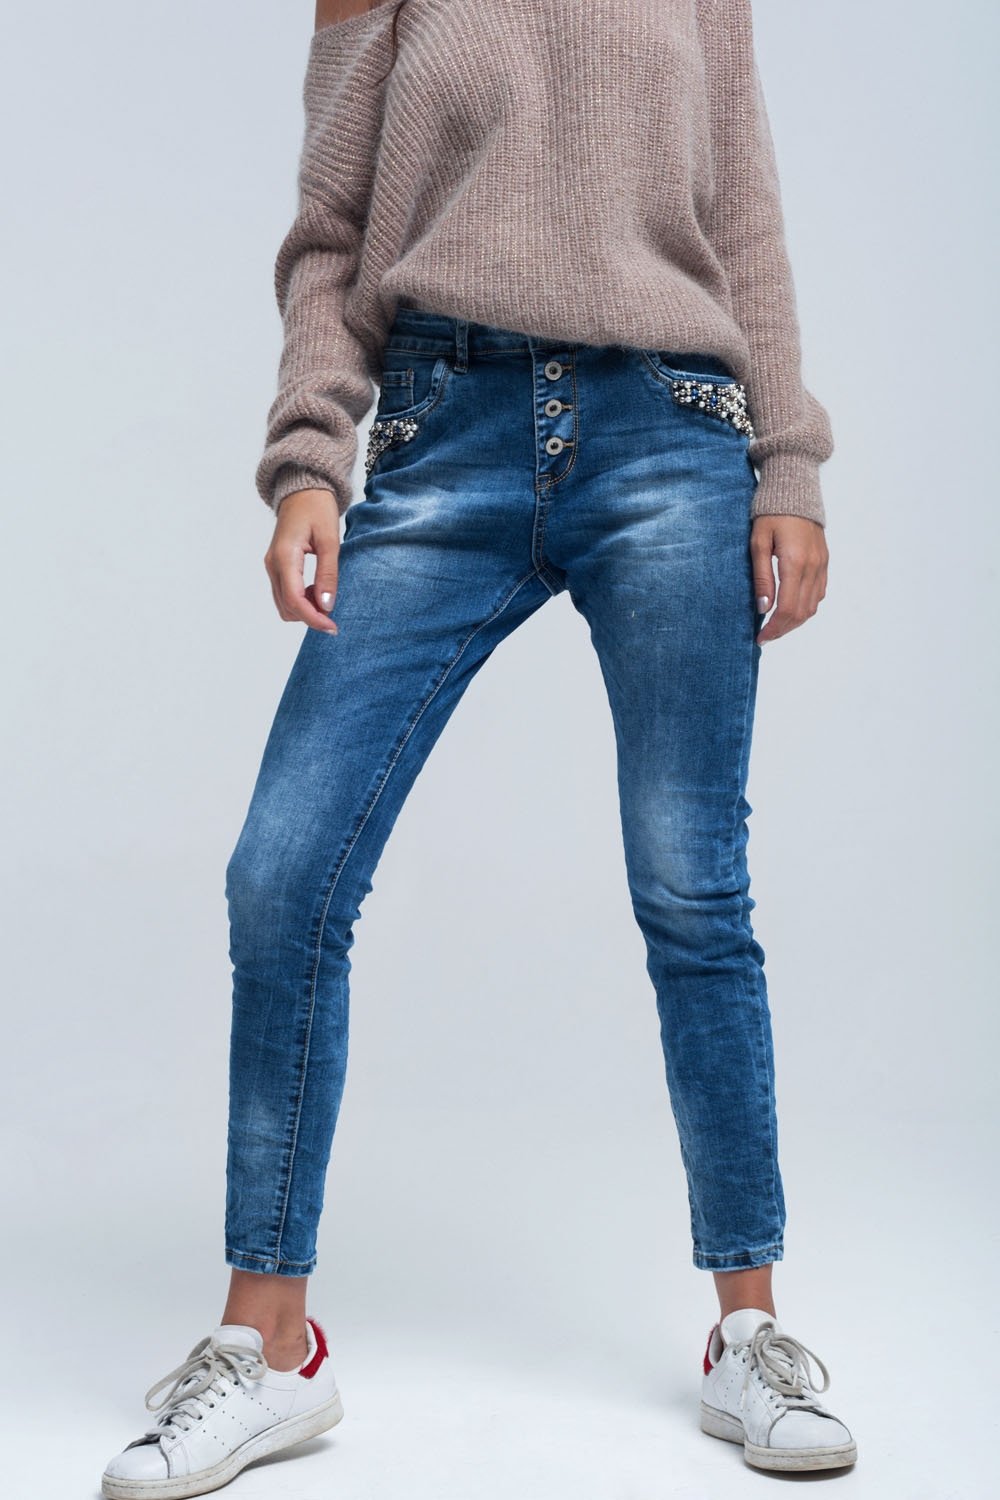 Blue Boyfriend Jeans With Pearls - LOLA LUXE